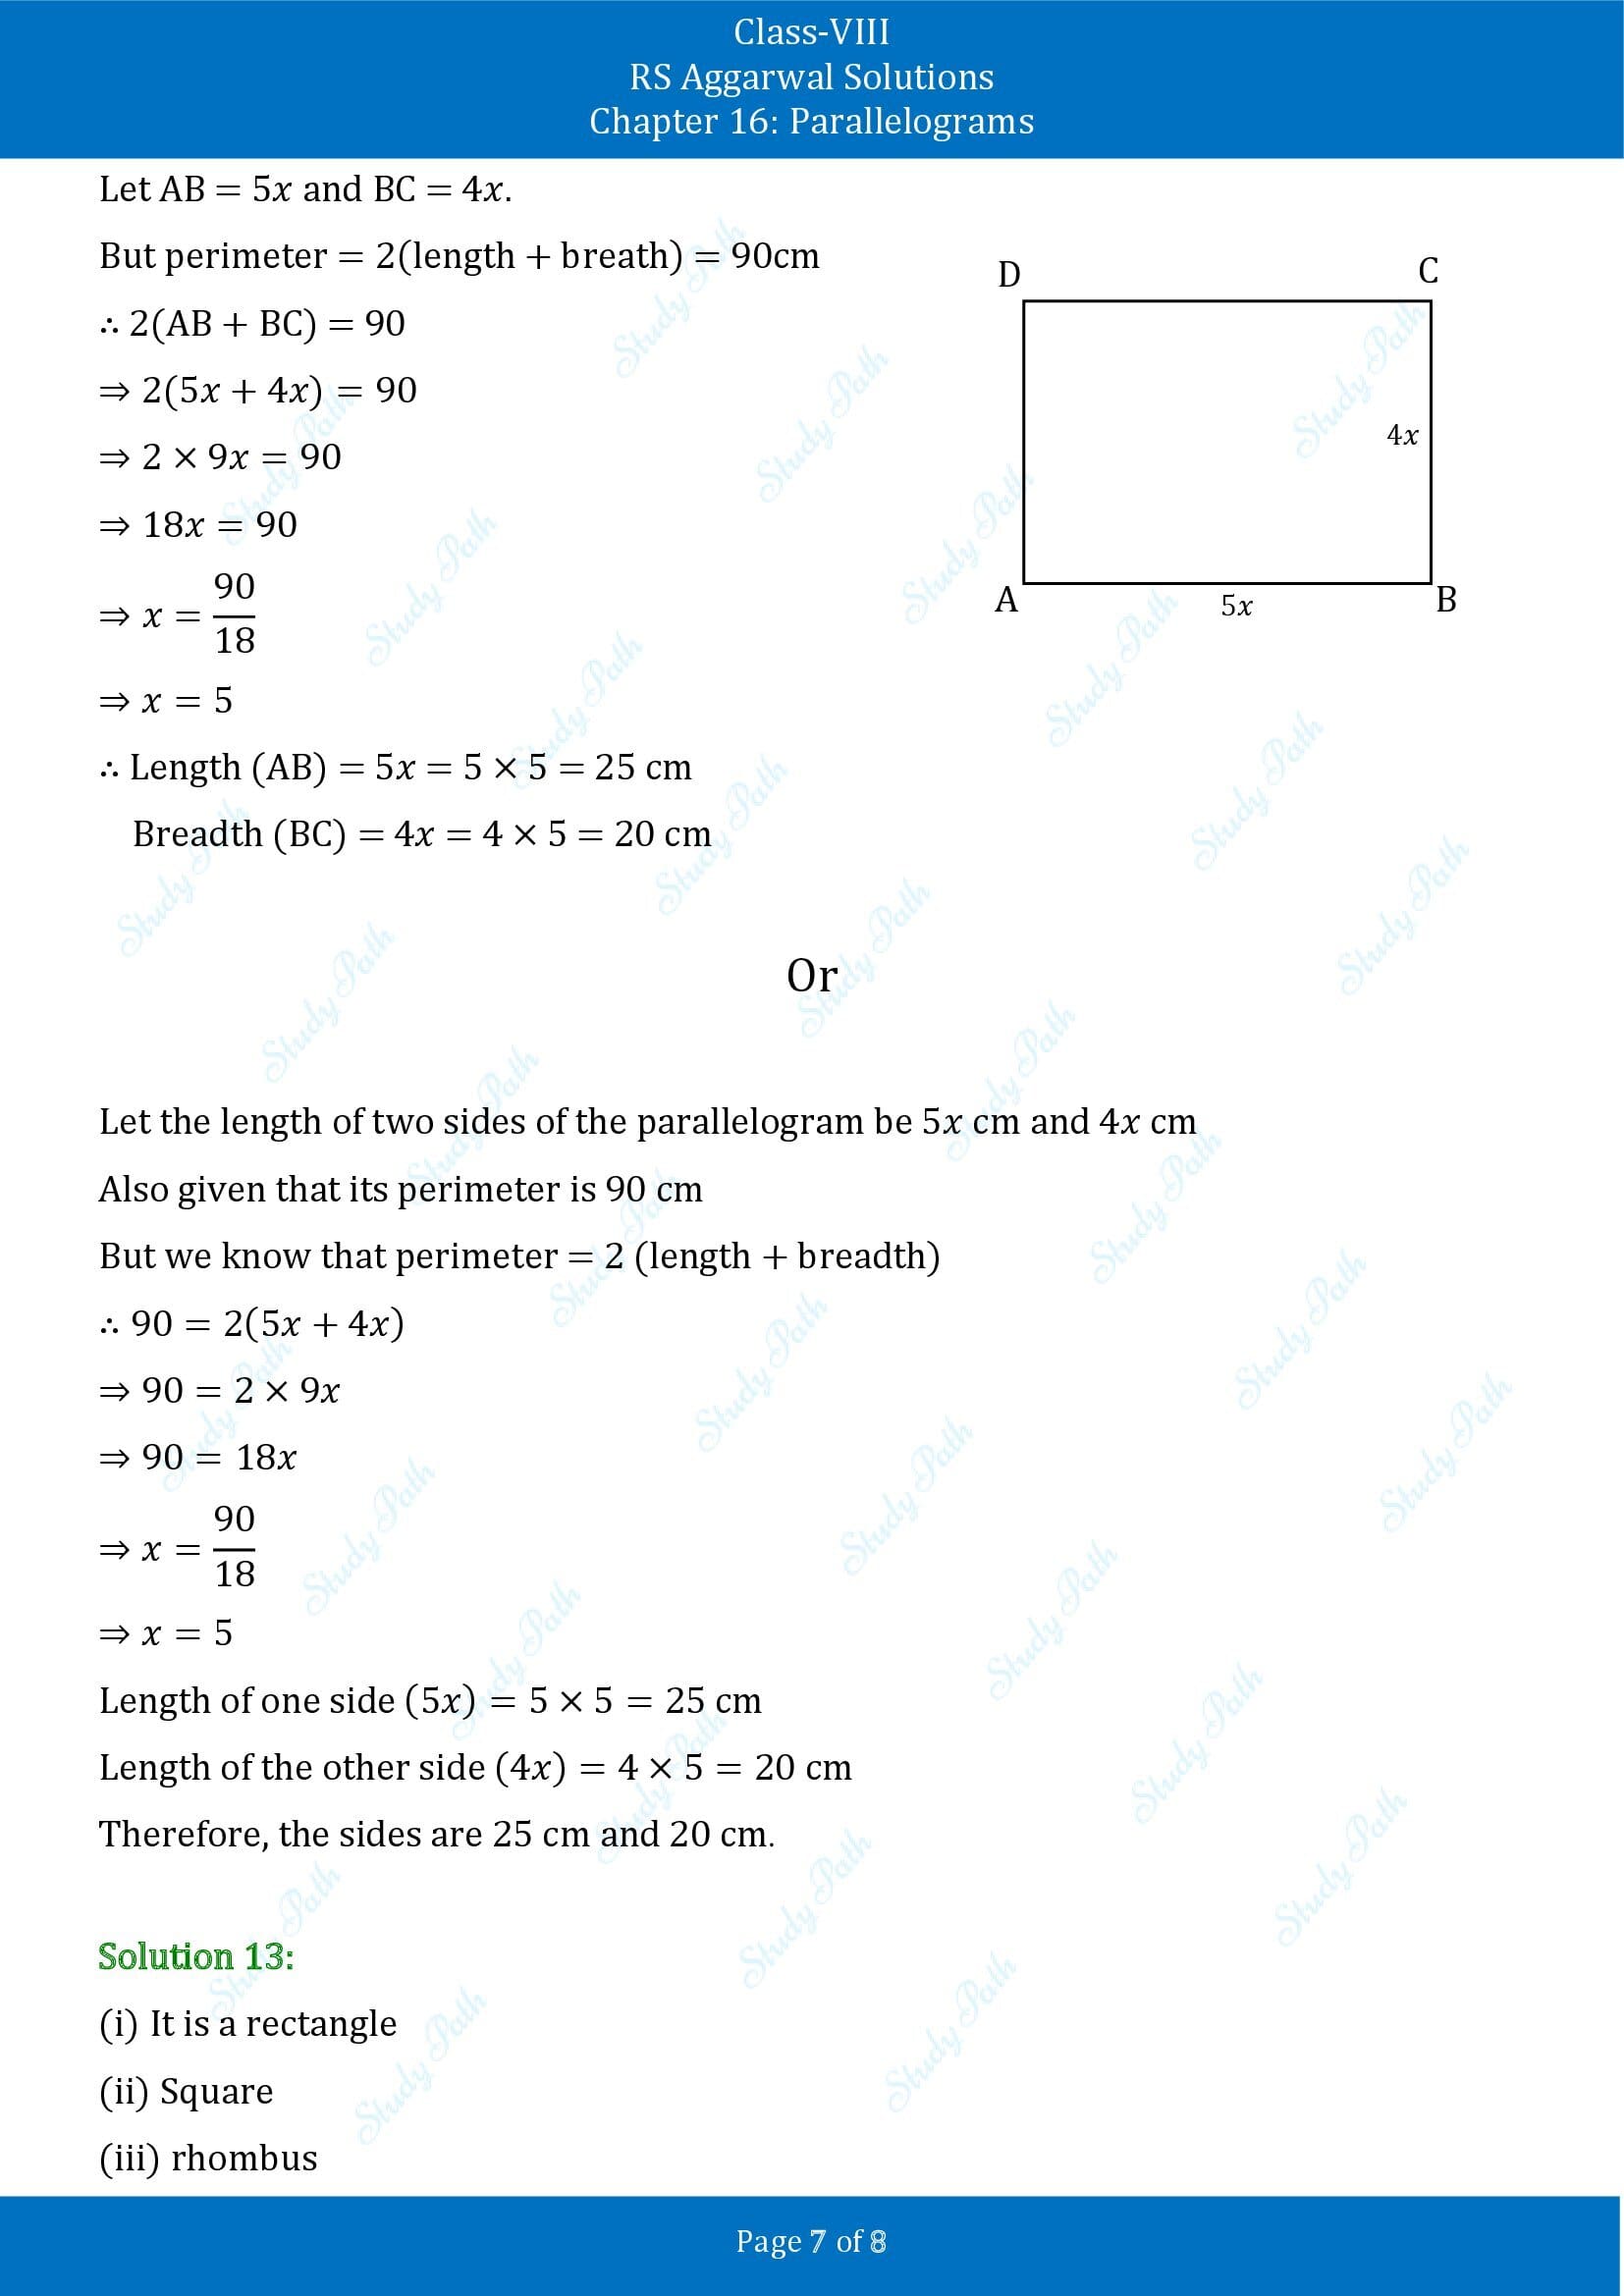 RS Aggarwal Solutions Class 8 Chapter 16 Parallelograms Exercise 16A 00007